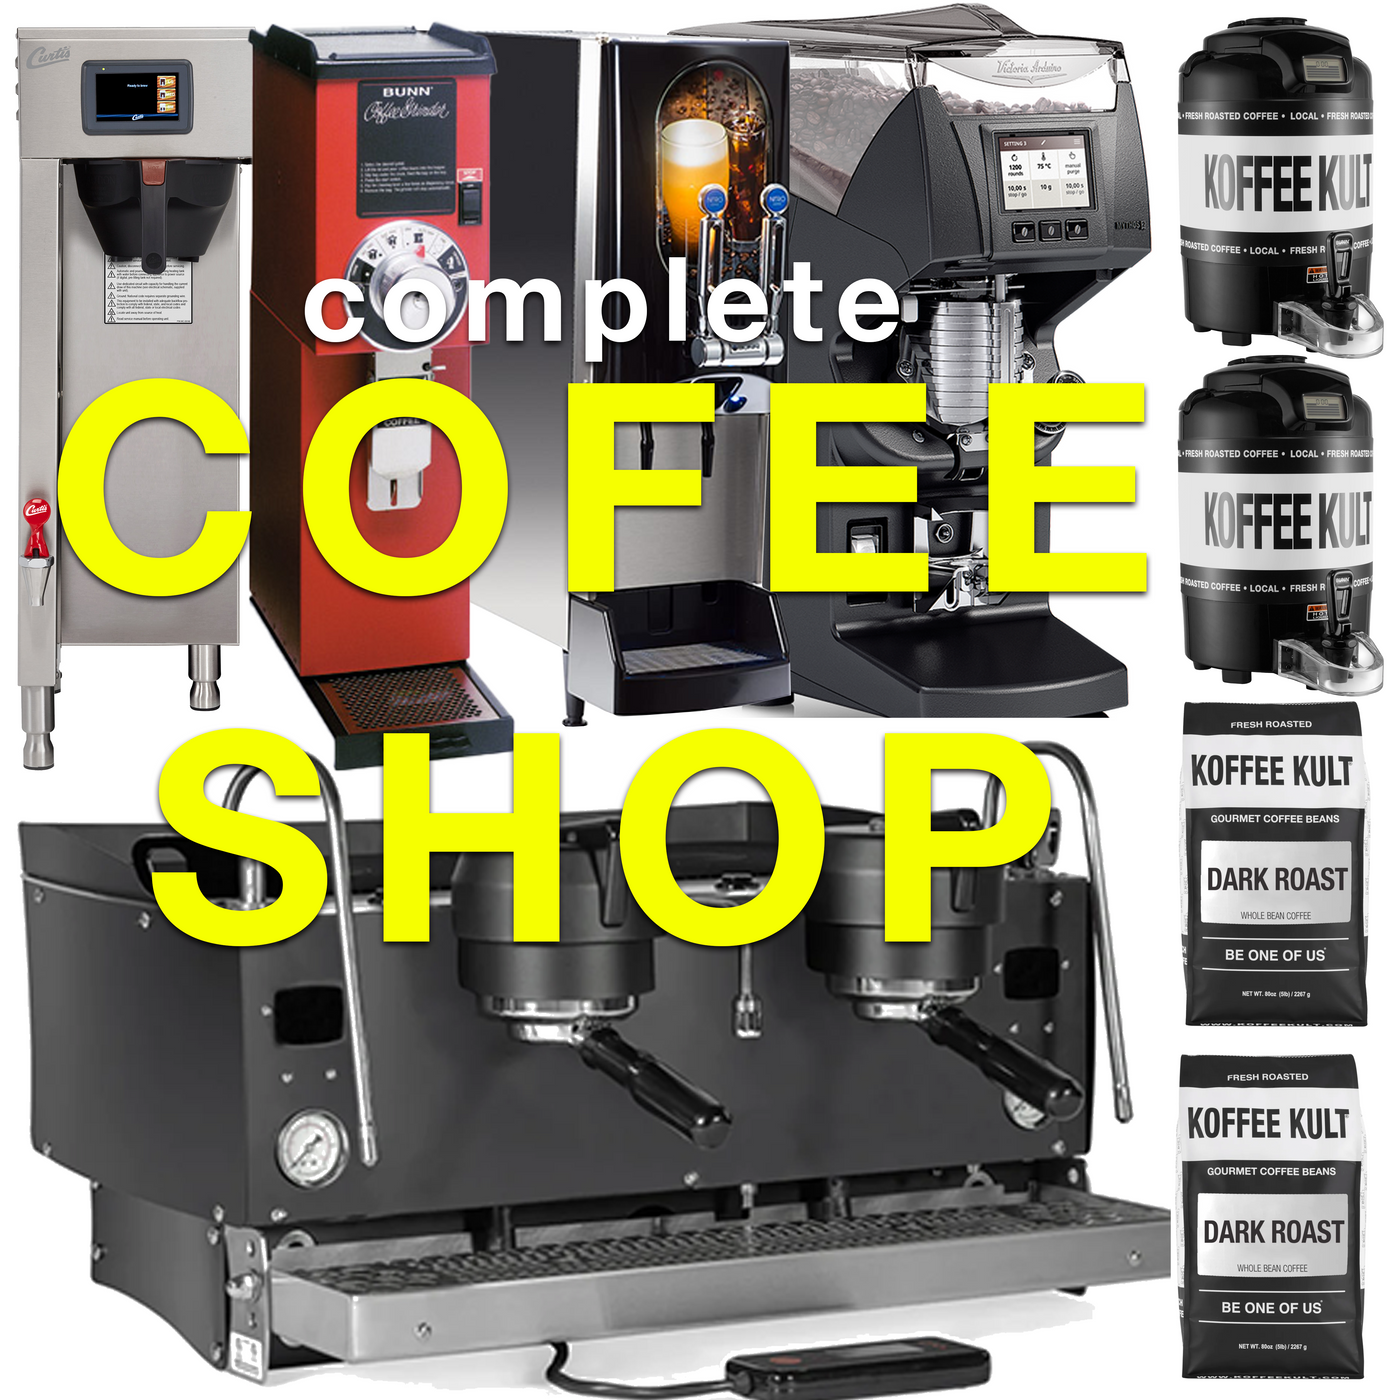 Complete Coffee Shop with Cold Brew Equipment